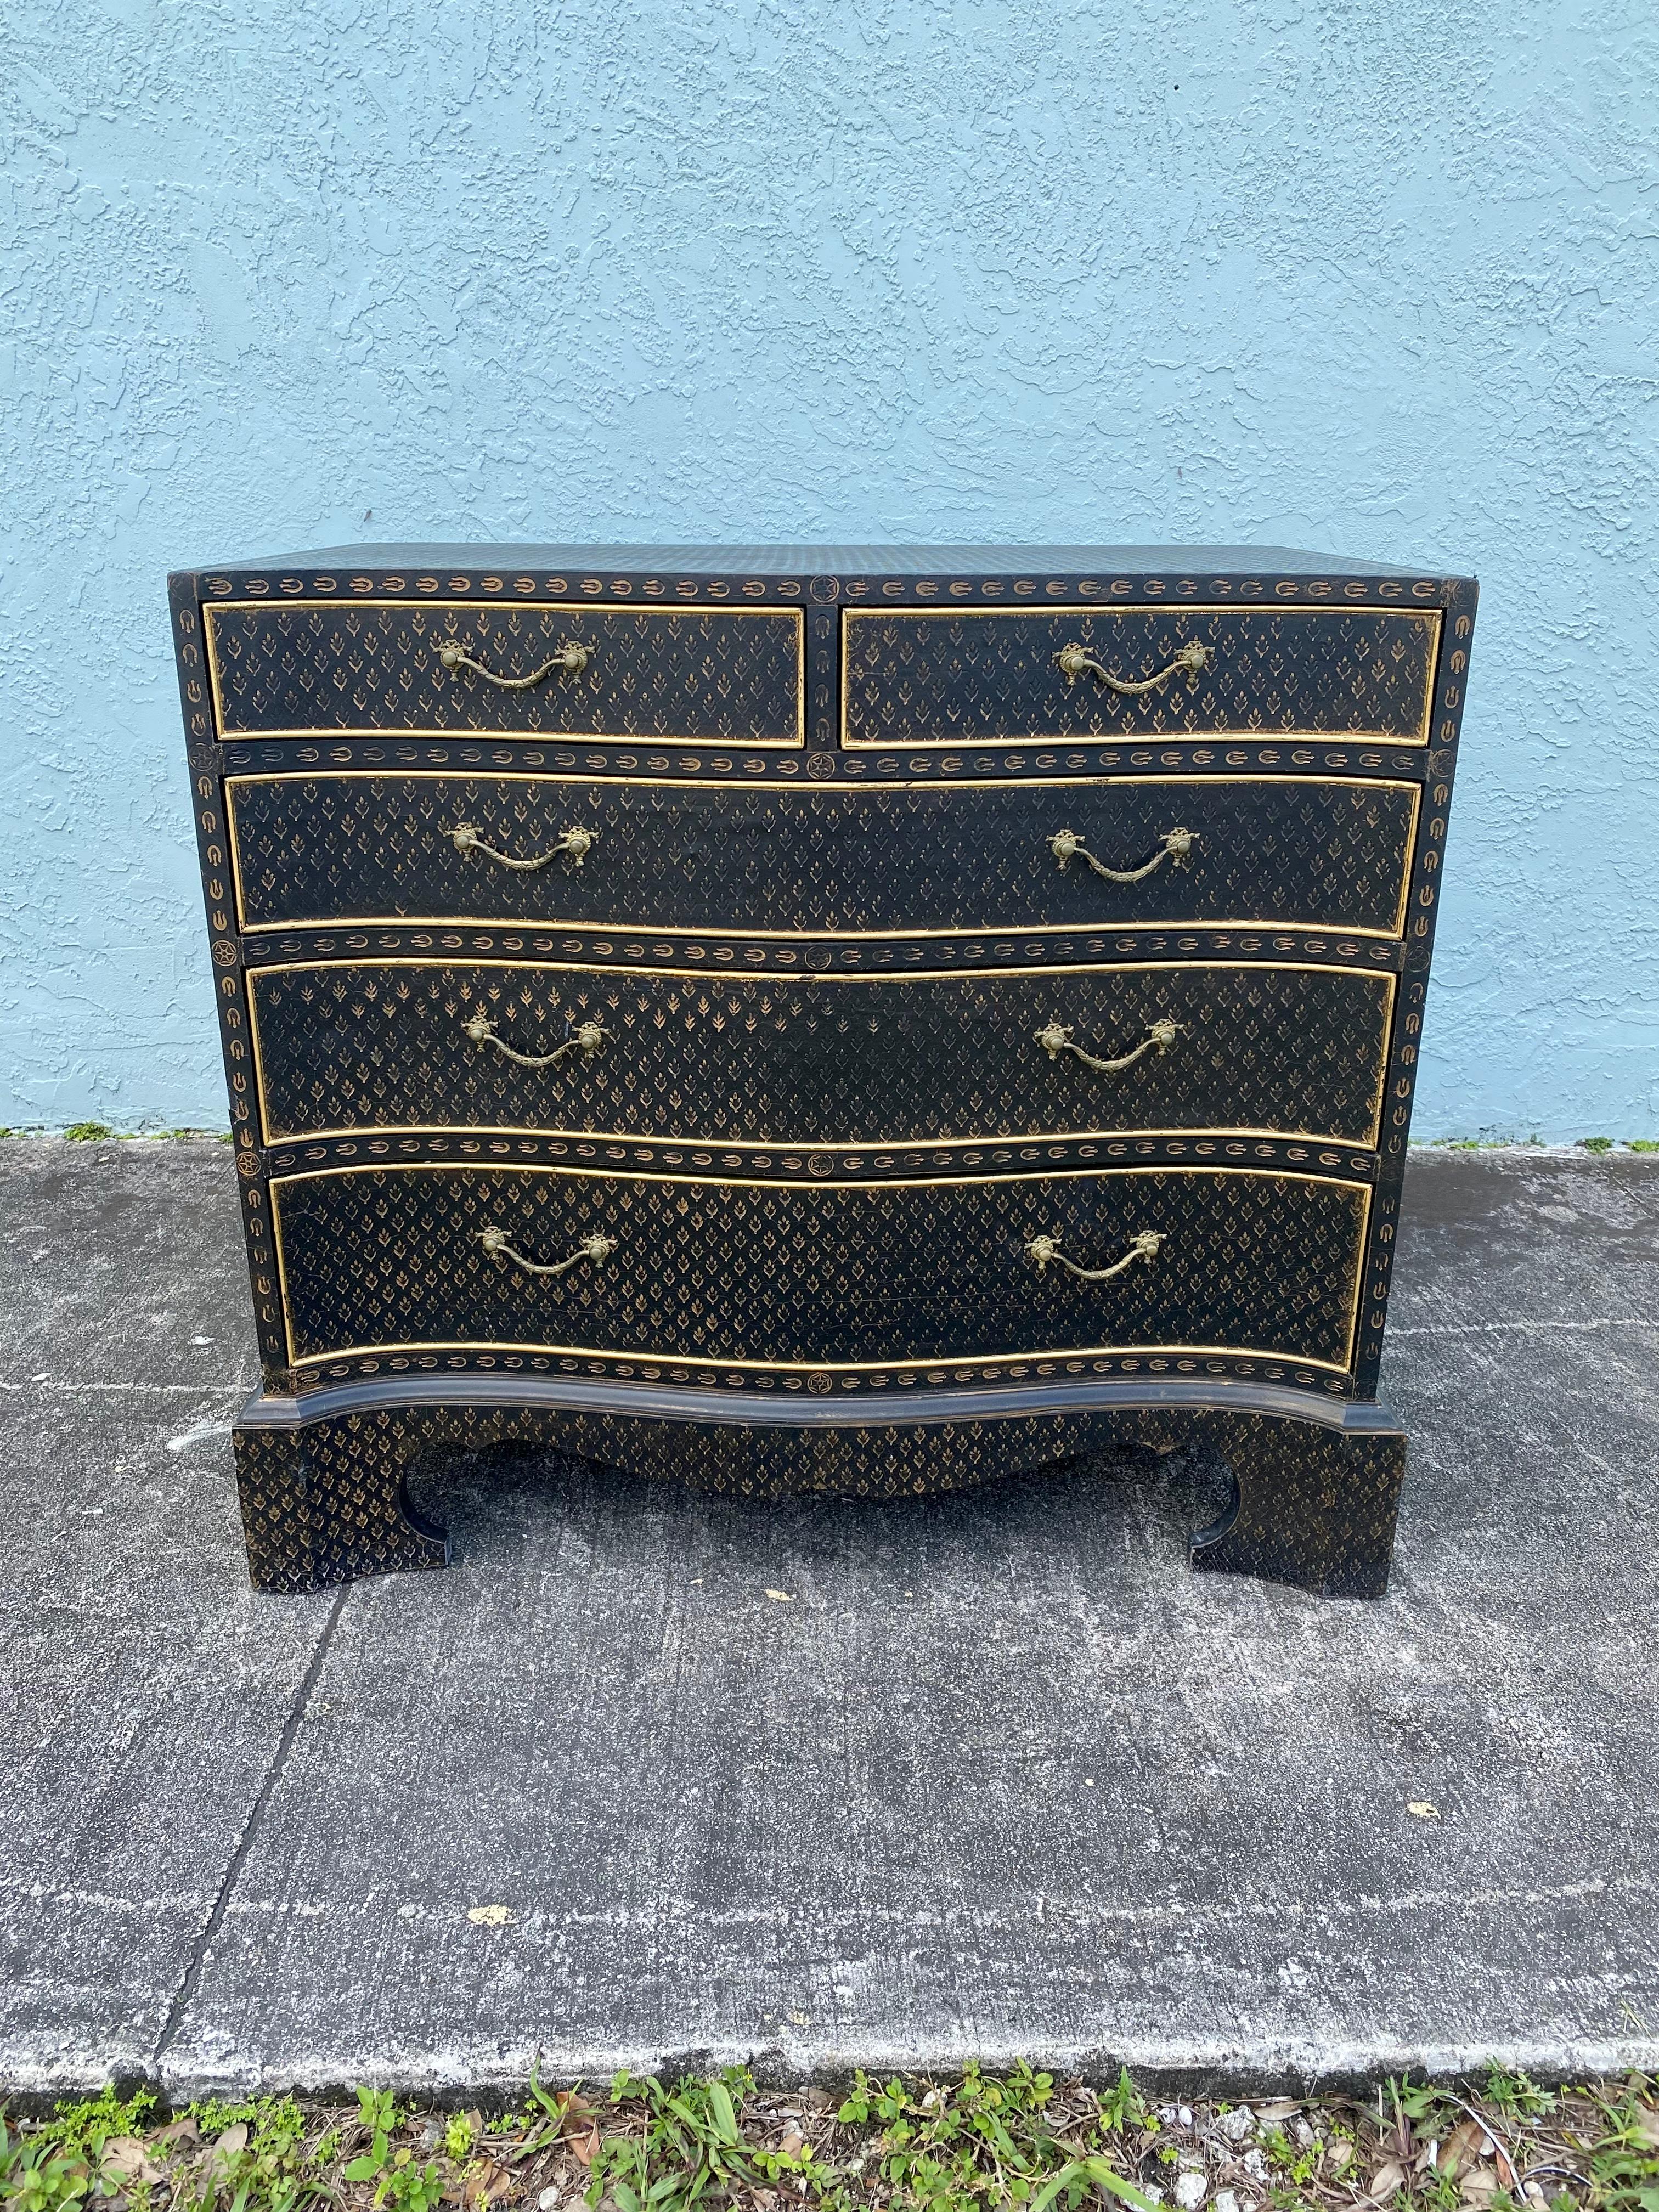 On offer on this occasion is one of the most stunning,  versatile, John Widdicomb commode dresser you could hope to find. Outstanding design is exhibited throughout. Very heavy and solid piece. The one of kind commode is statement piece and packed